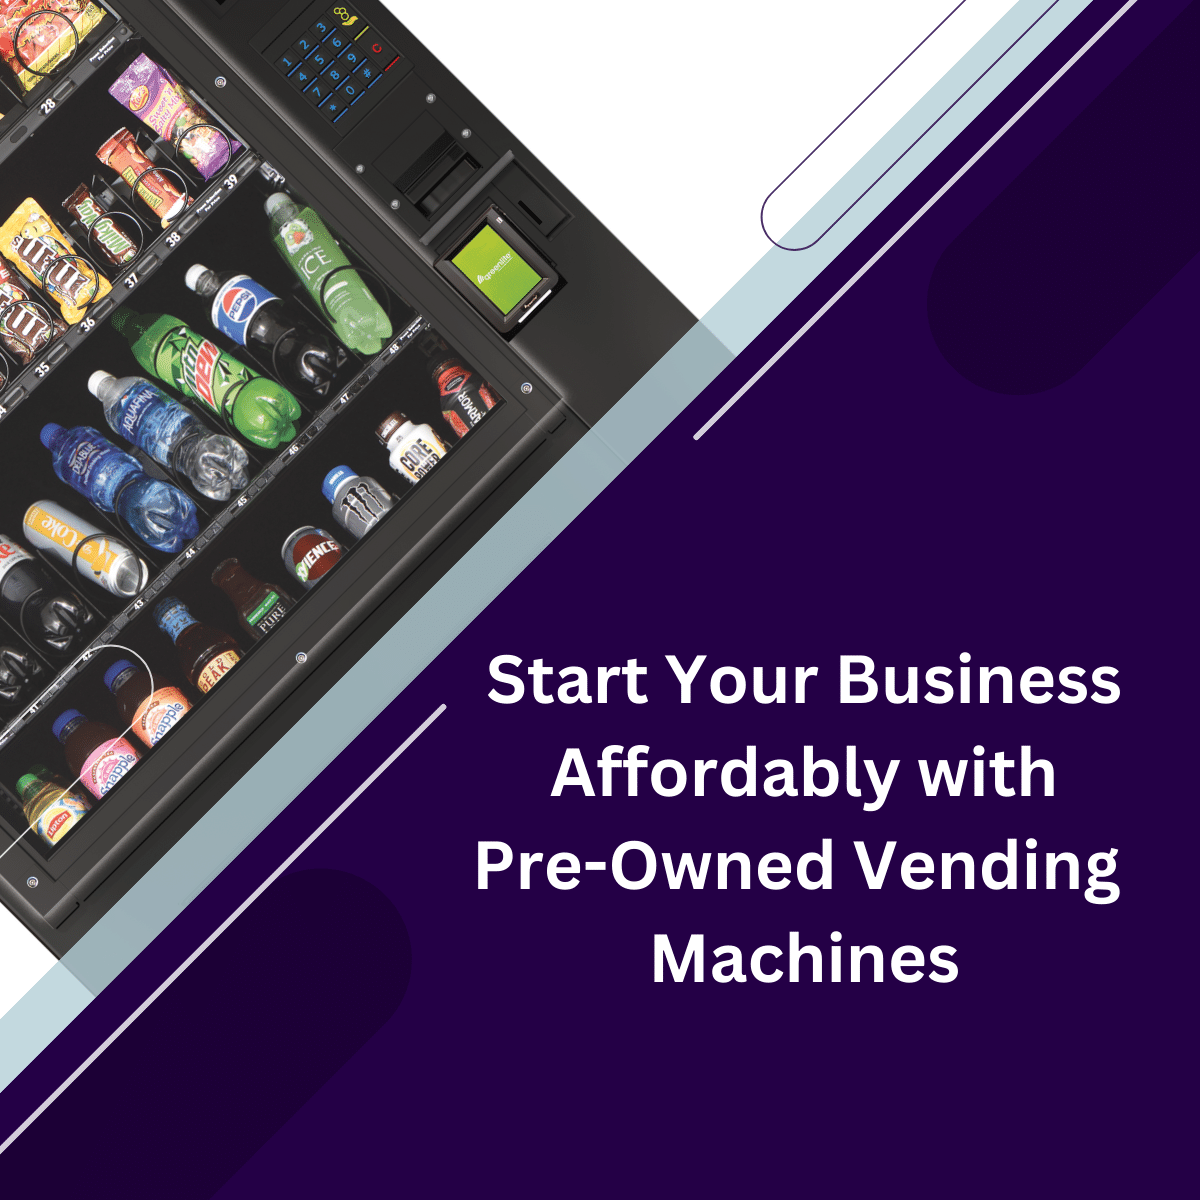 SAVE MONEY STARTING YOUR OWN BUSINESS WITH USED VENDING MACHINES